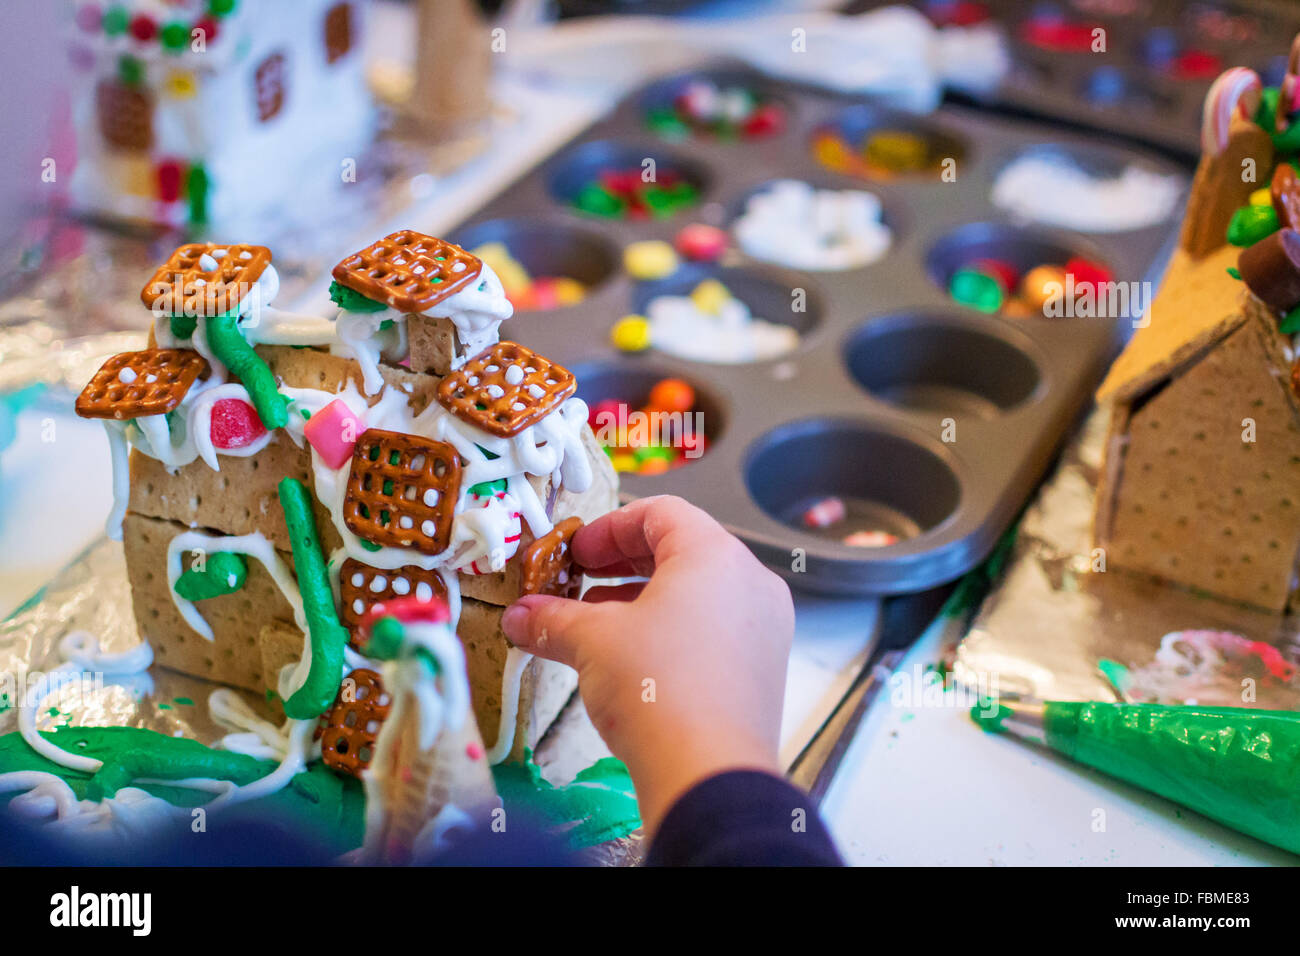 Boy decorating a gingerbread house Stock Photo